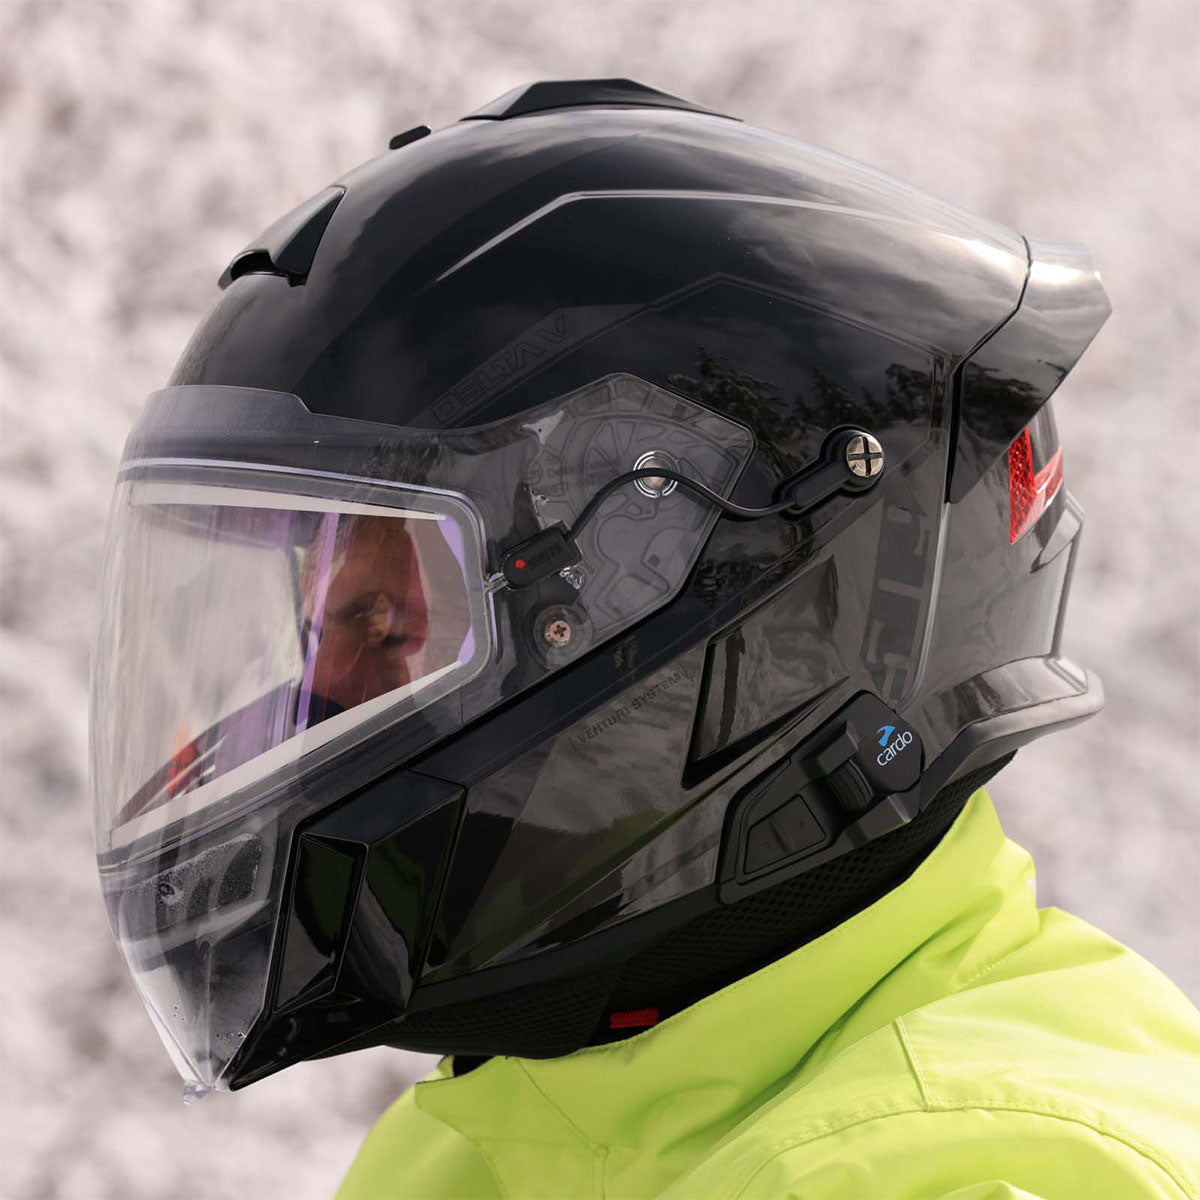 Are 509 Helmets Compatible with Speakers and Communication Systems?